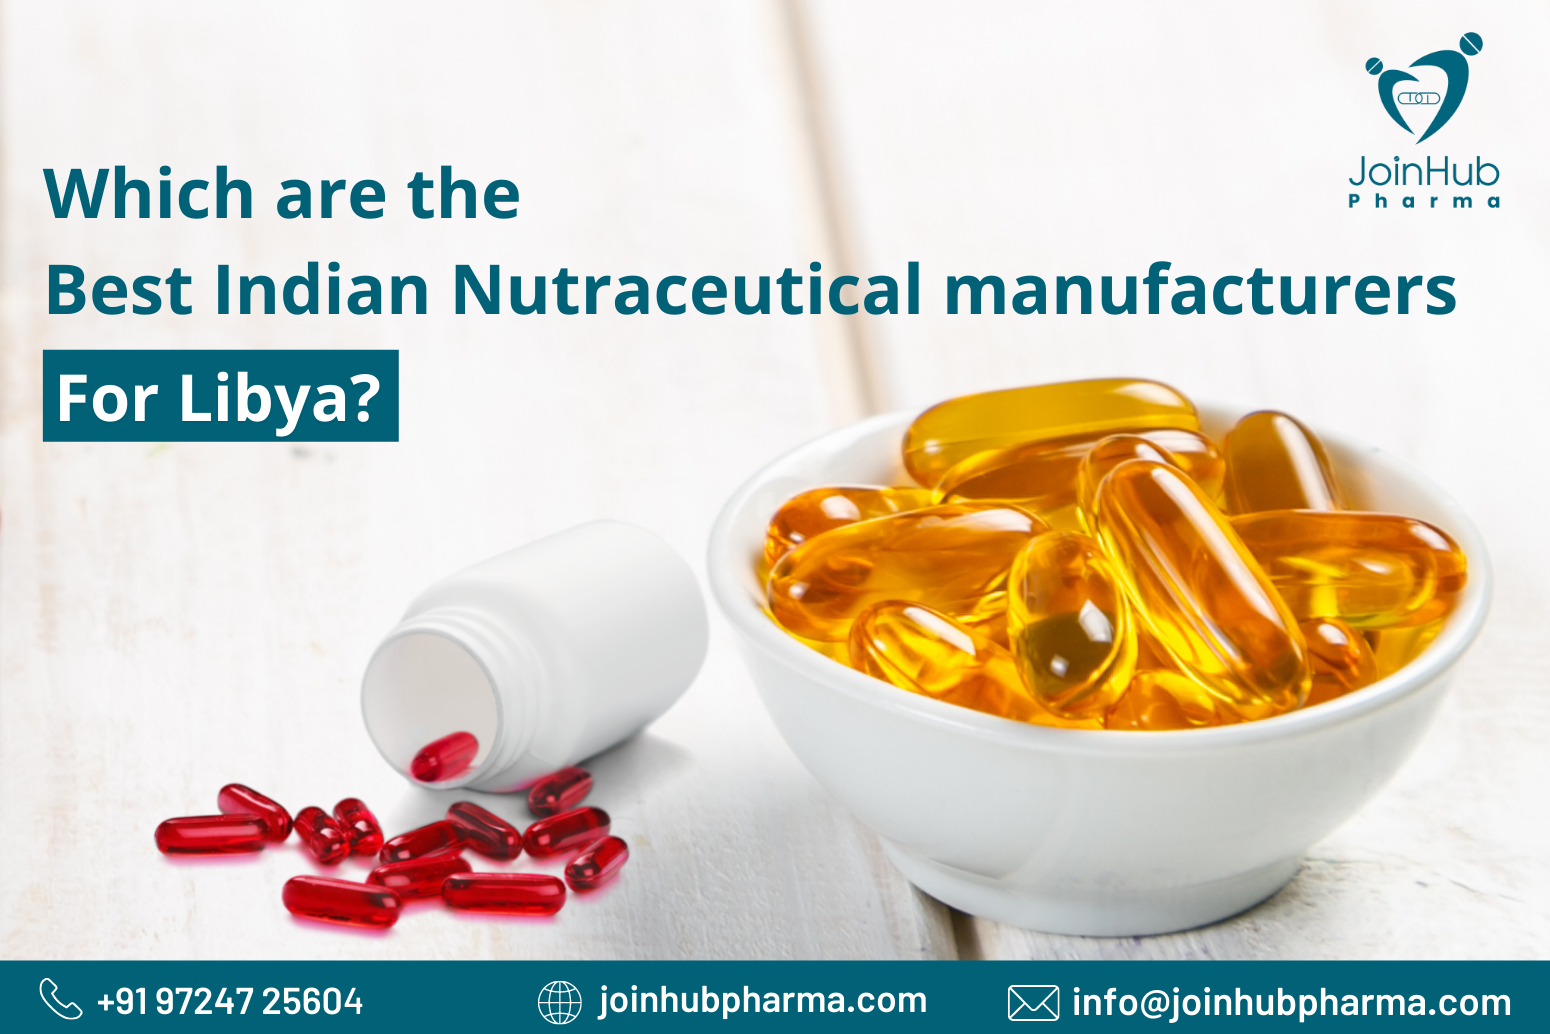 Which is the leading Indian pharma API manufacturer for Libya